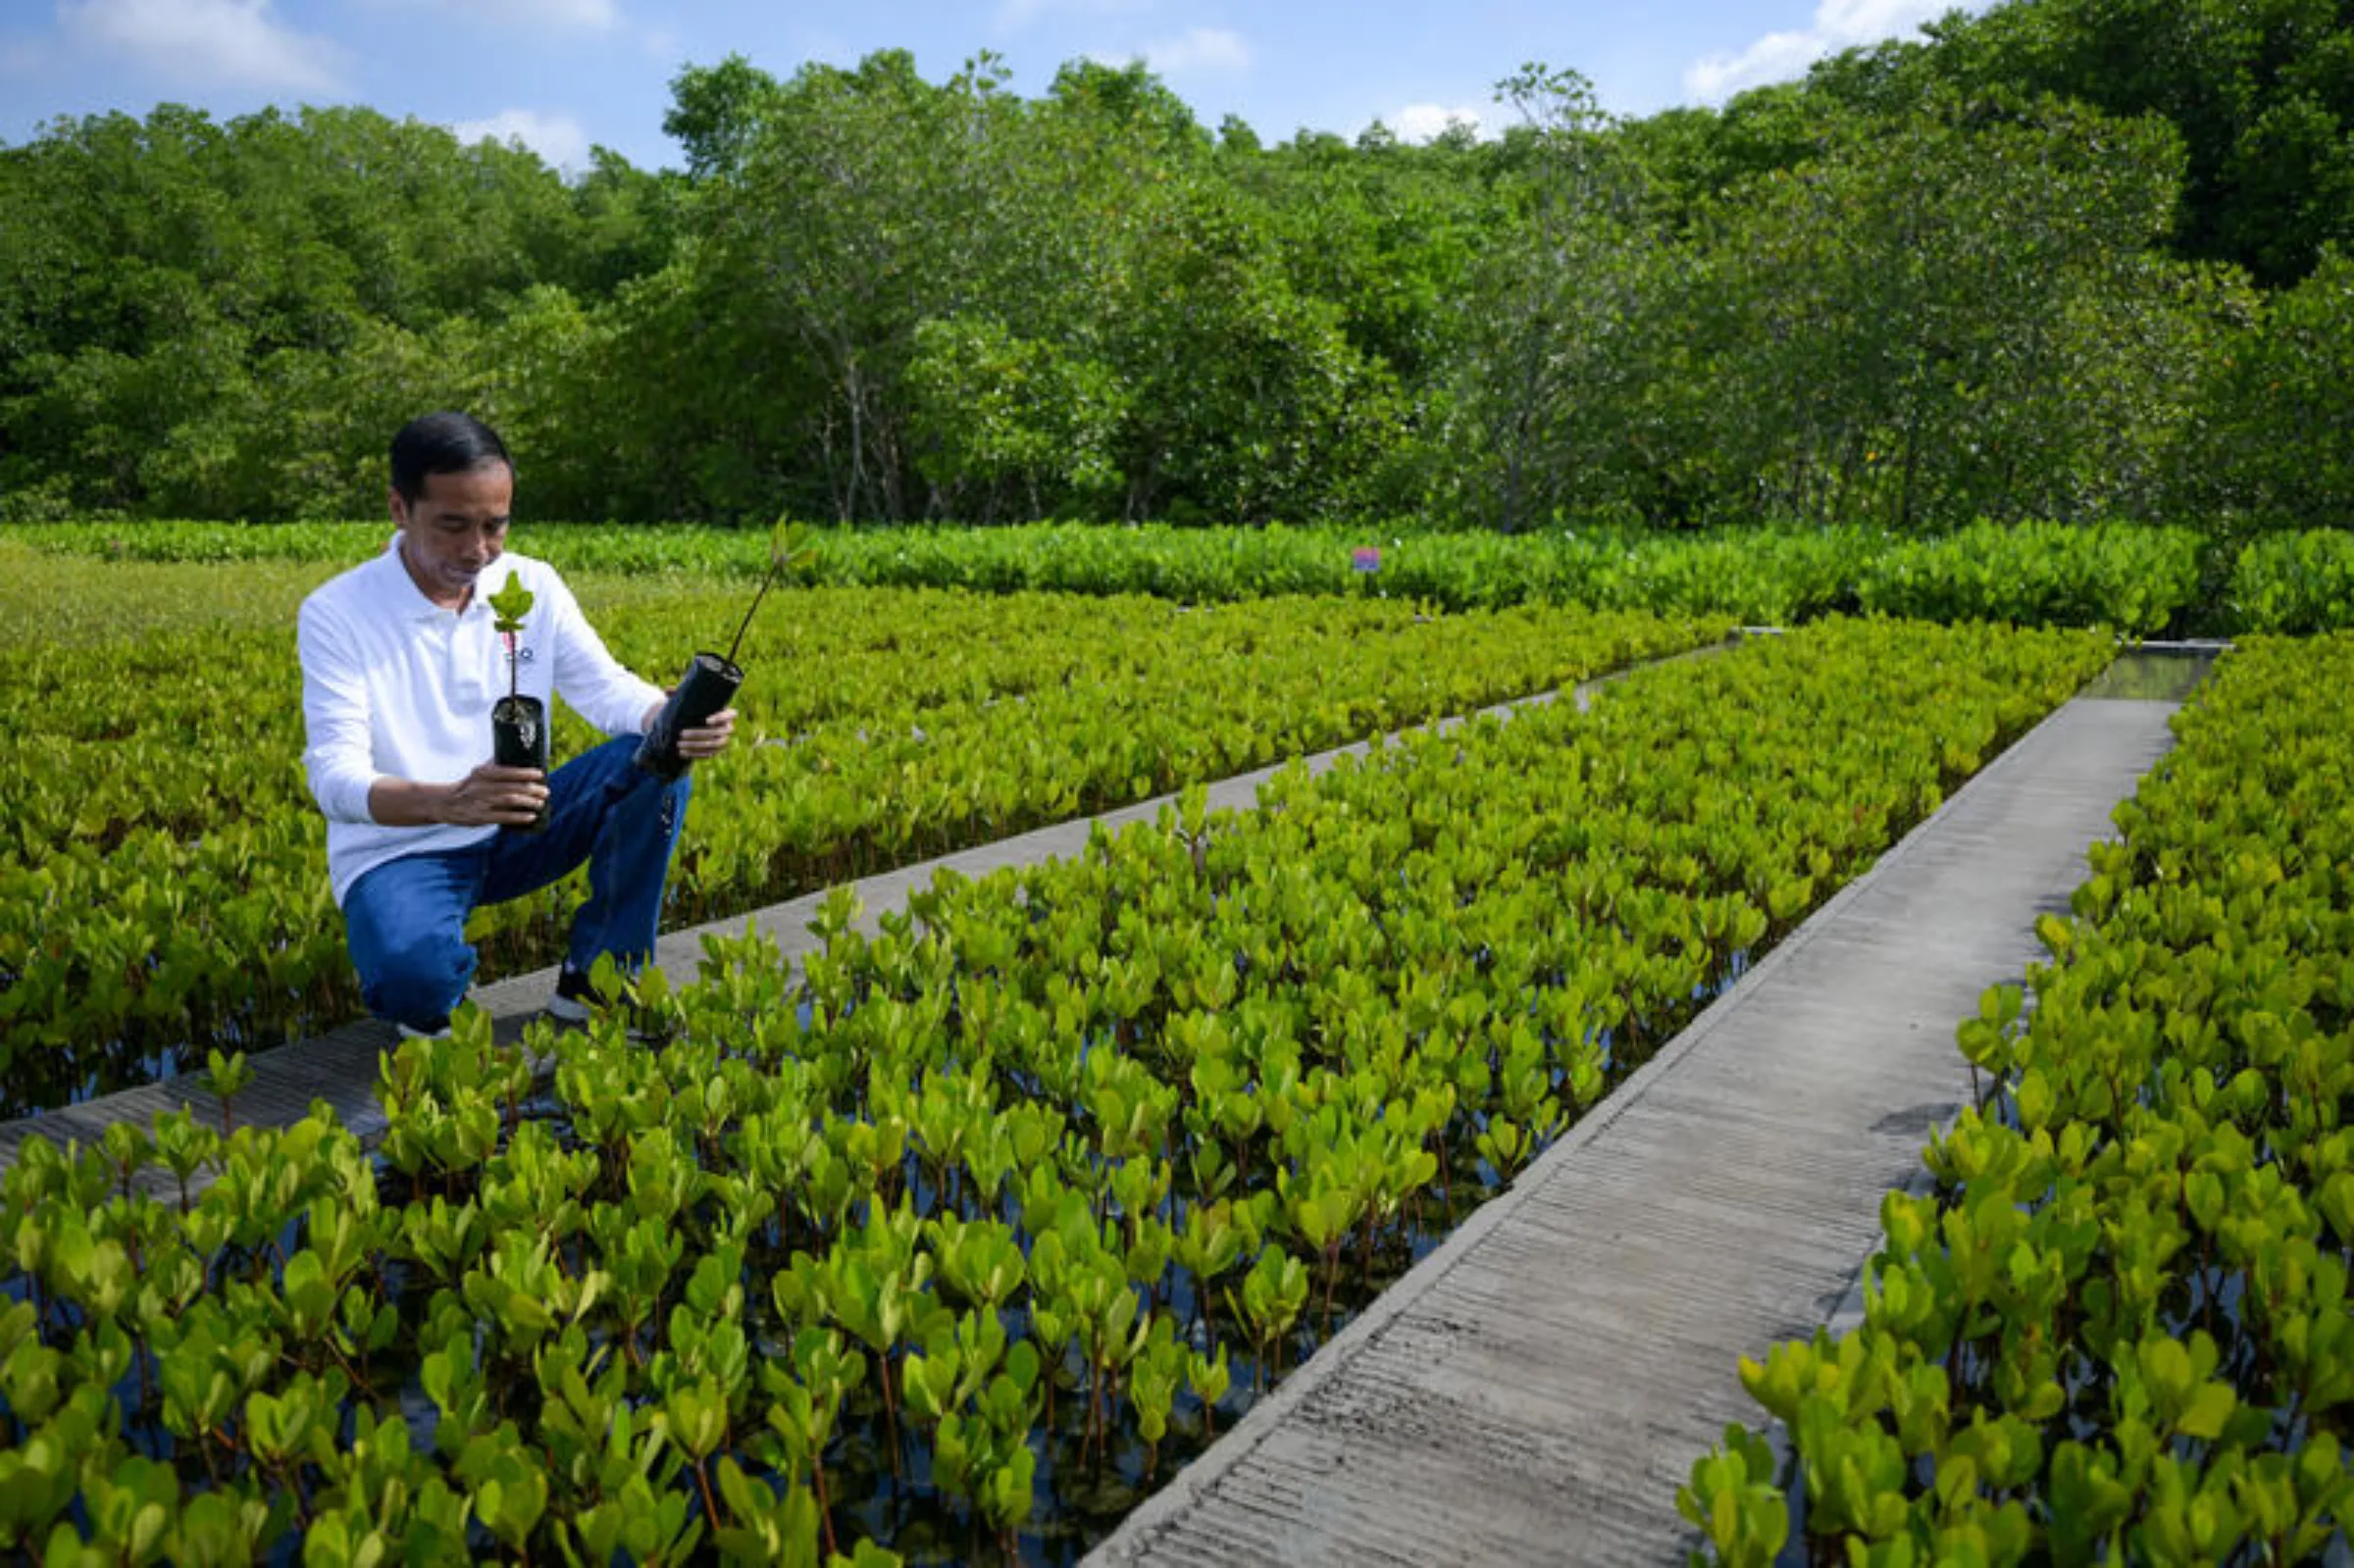 Indonesian President Joko Widodo shows a mangrove seeding area to journalists as part of the G20 Summit, in southern of Denpasar, Indonesia on November 16, 2022. Alex Brandon/Pool via REUTERS 